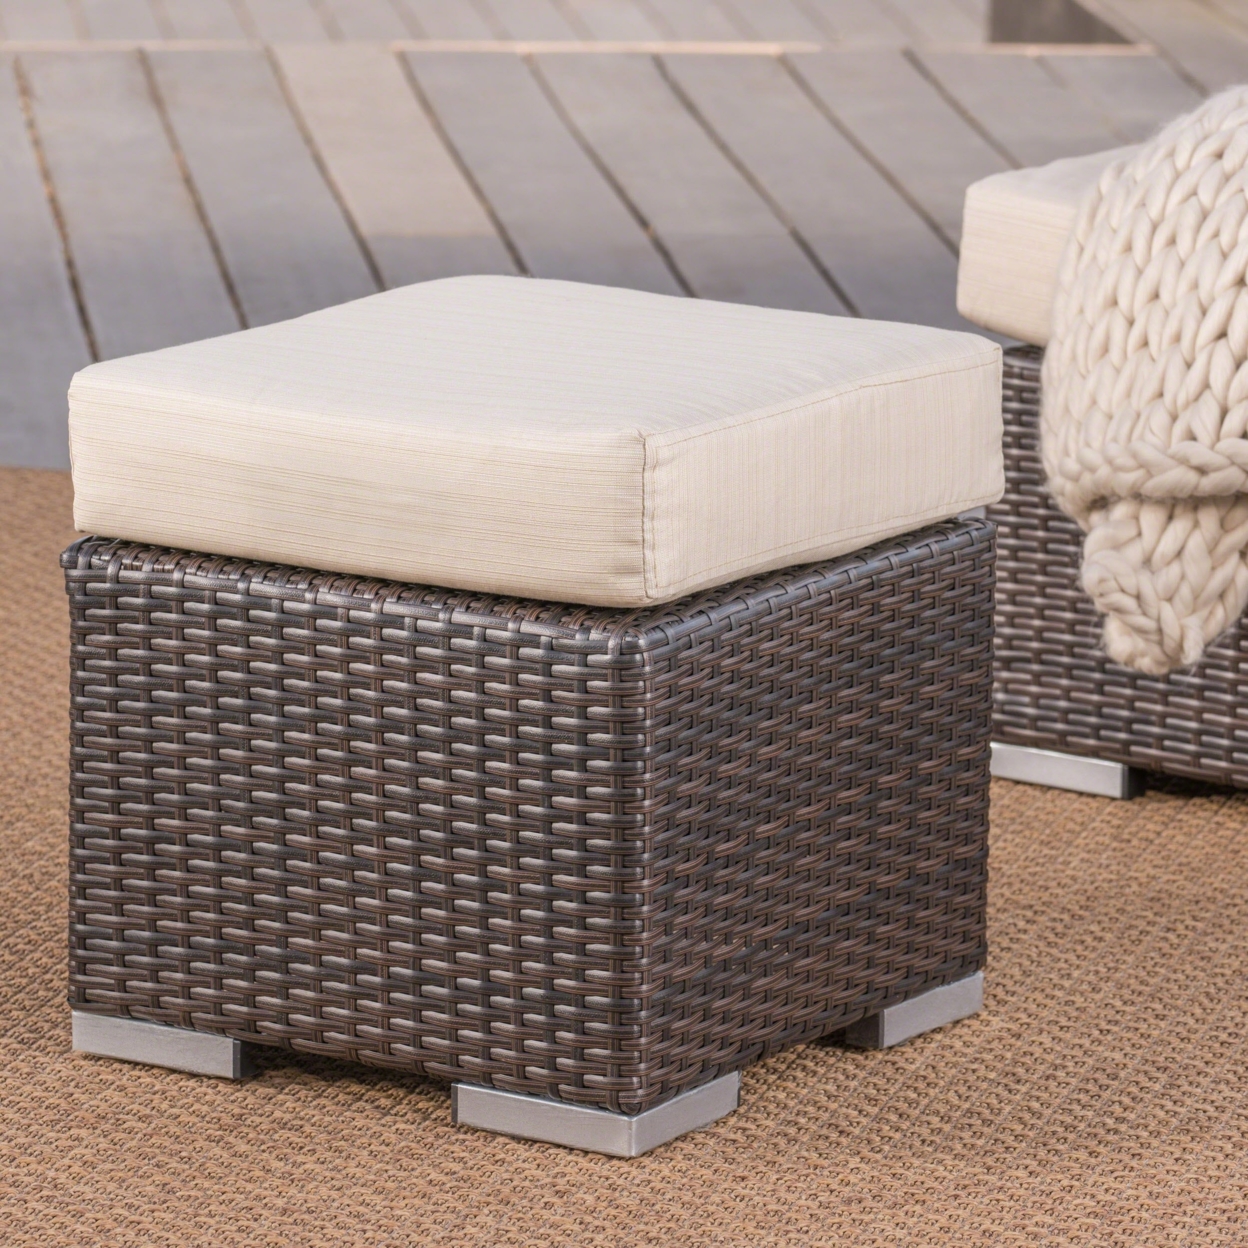 Santa Rosa Outdoor 16 Inch Wicker Ottoman Seat With Water Resistant Cushion - Multi-brown/beige, Set Of 2